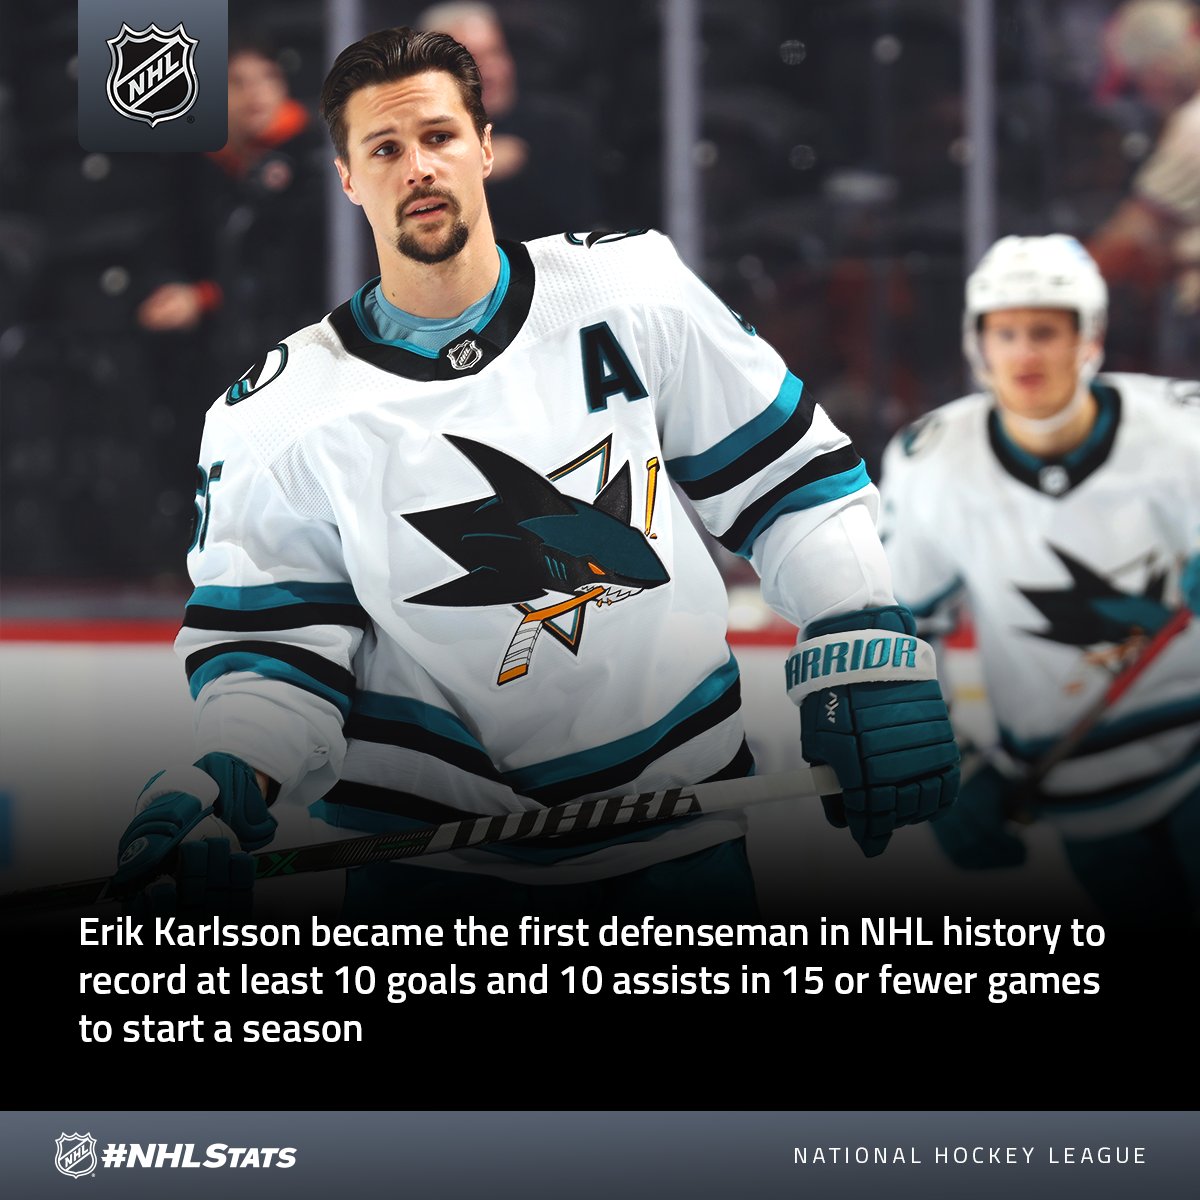 JFresh on X: Erik Karlsson, traded to PIT, is an elite offensive